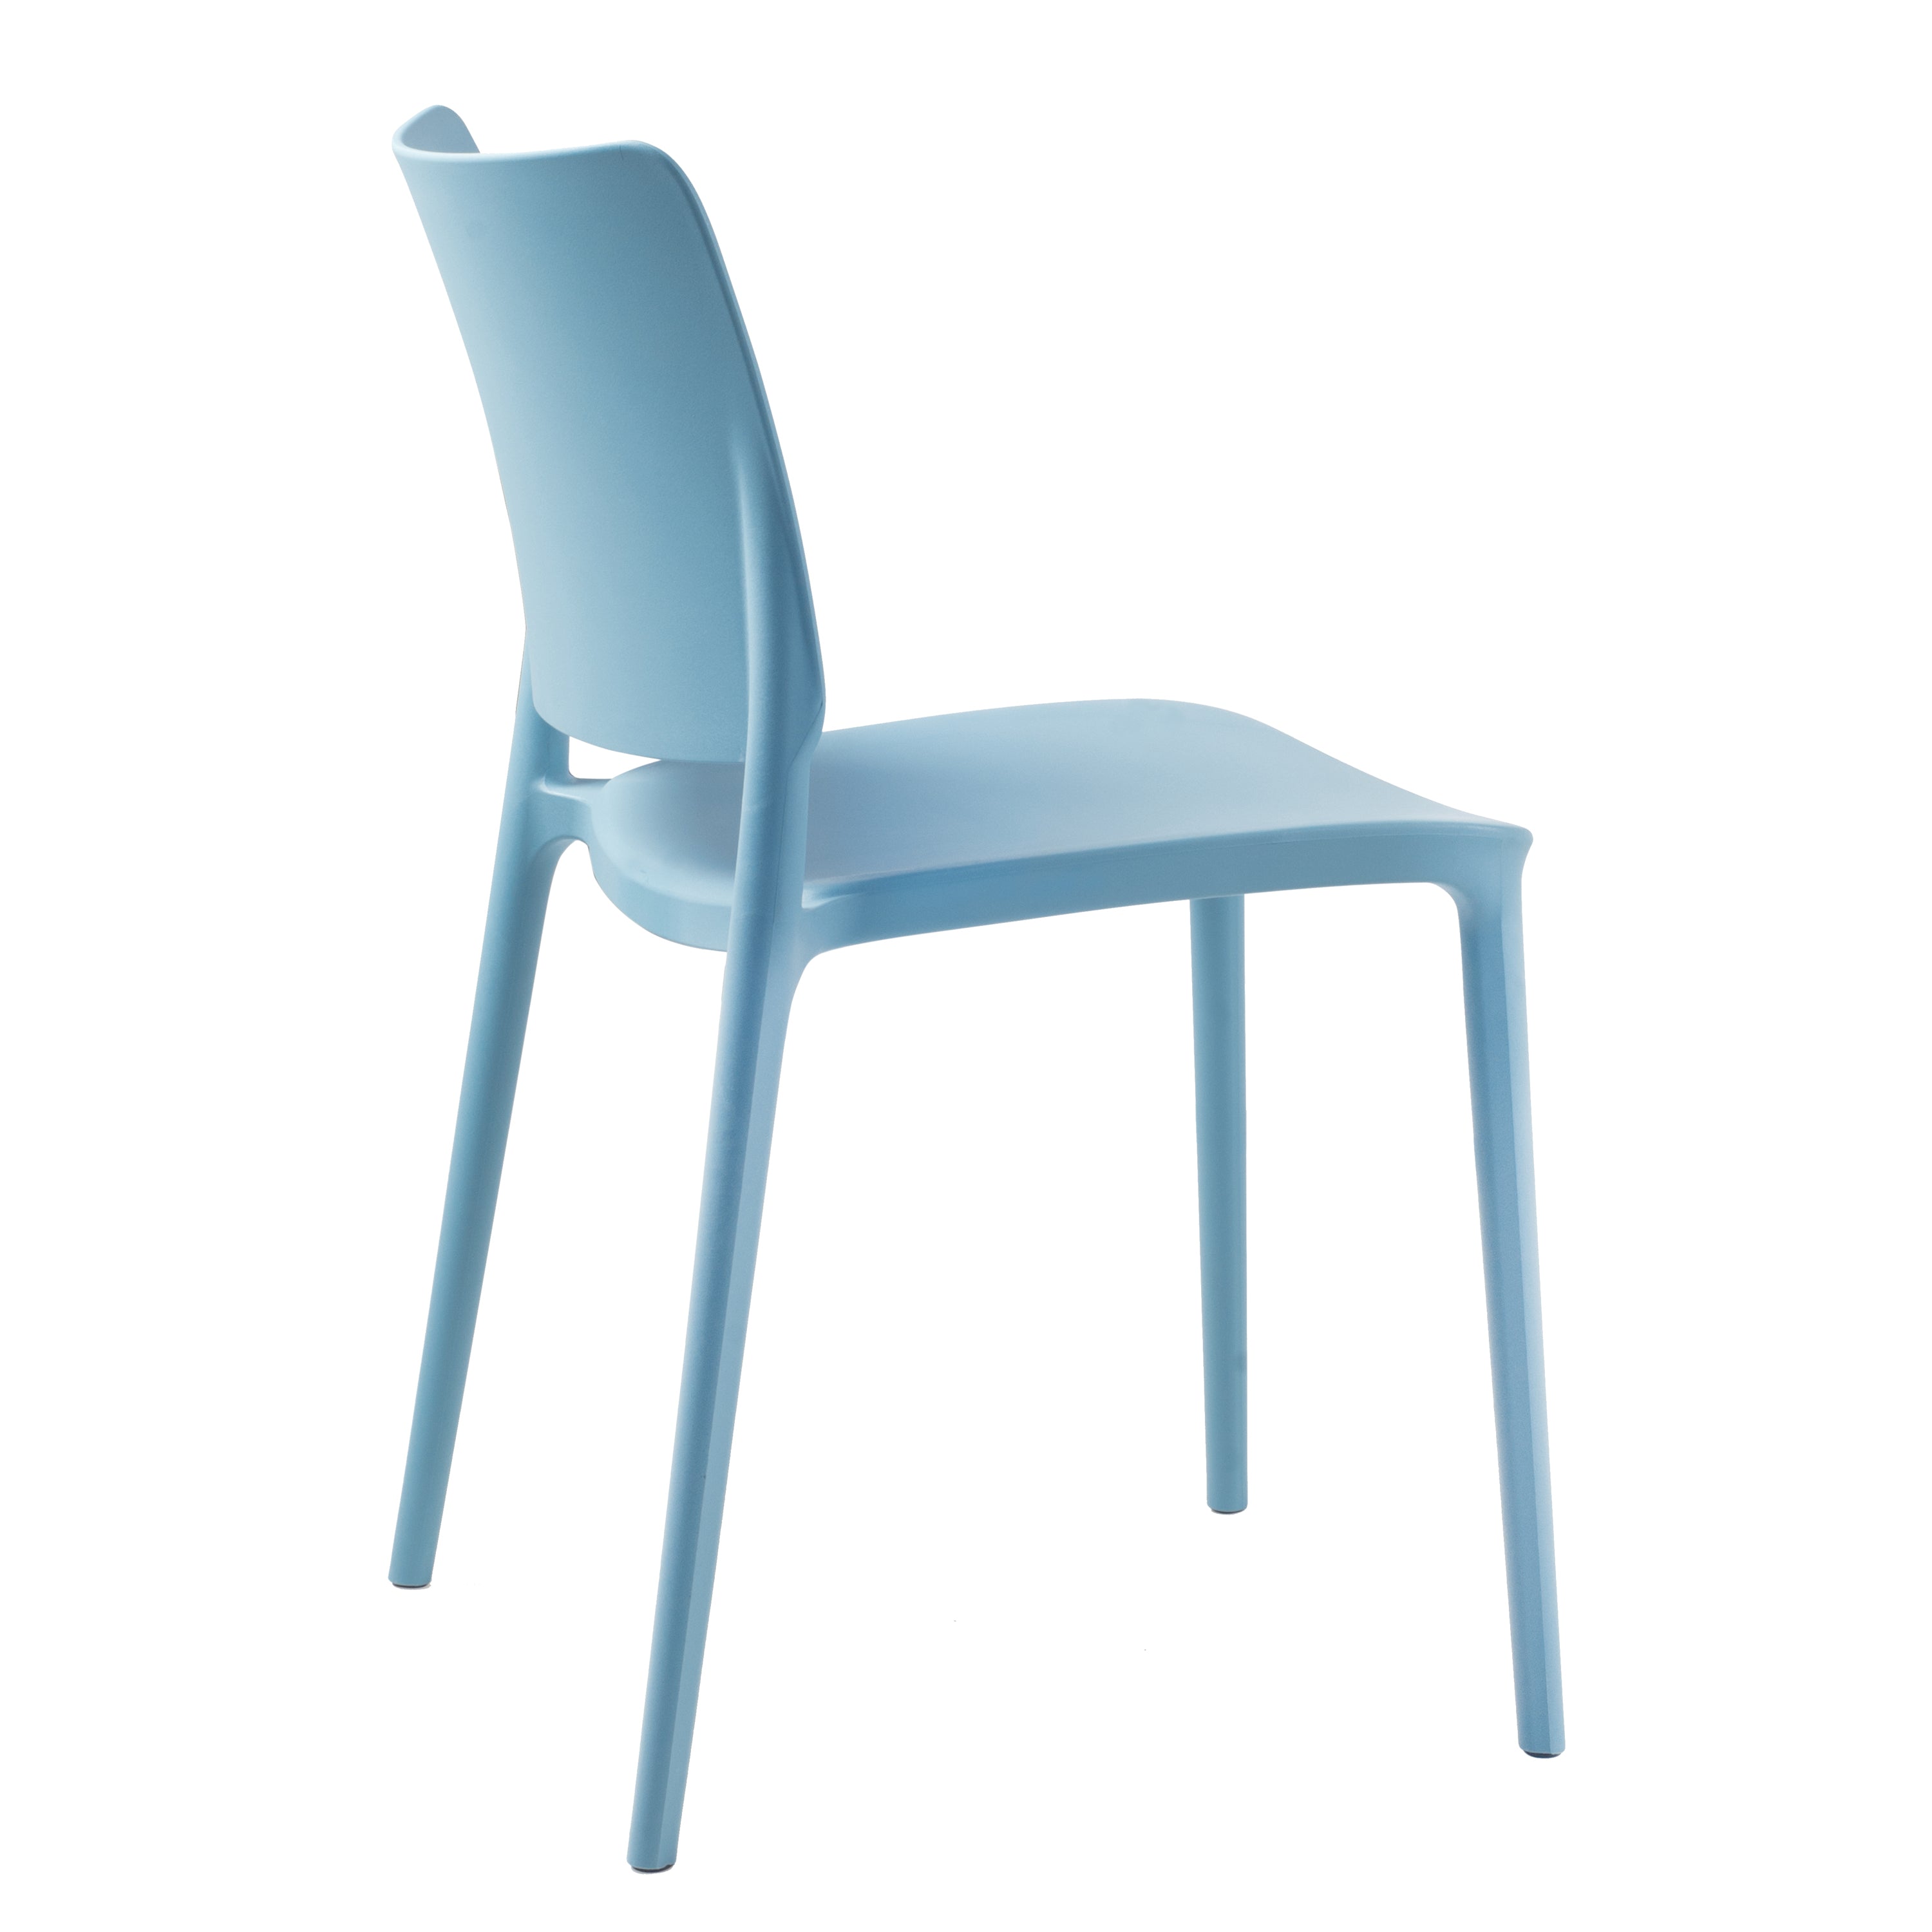 Cleo Patio Dining Chair in Aqua Blue - (Set of 2)